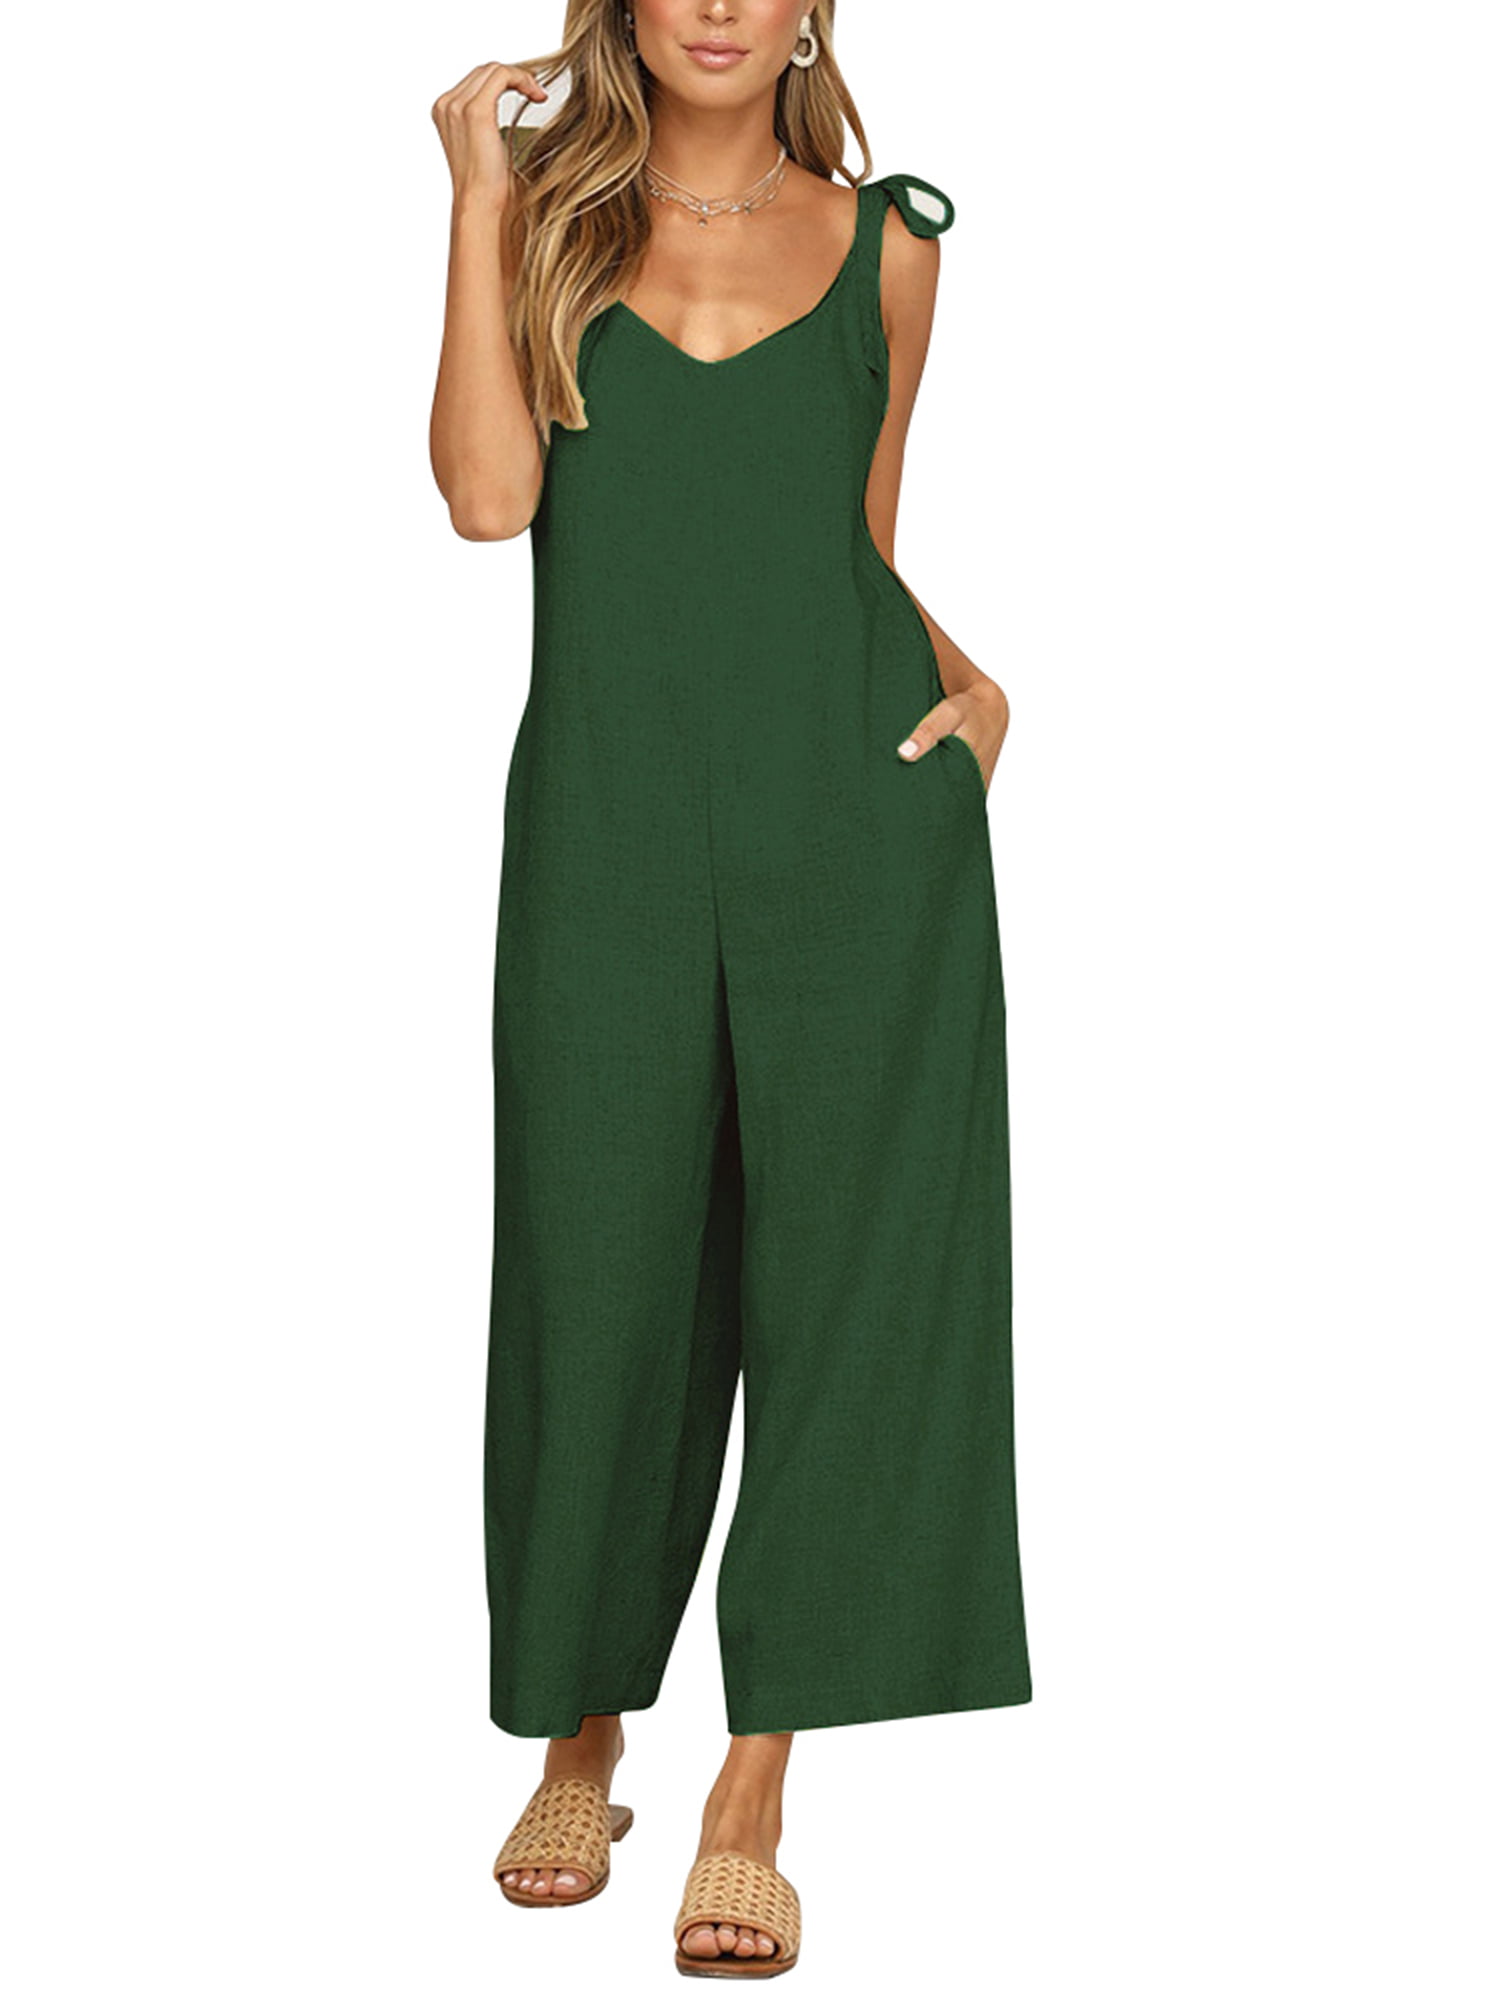 Women’s Summer Sleeveless Baggy Dungarees with Pockets Loose Playsuit Overalls Cotton Linen Strappy Jumpsuit Wide Leg Long Pants Women Summer Casual Outfits S-3XL